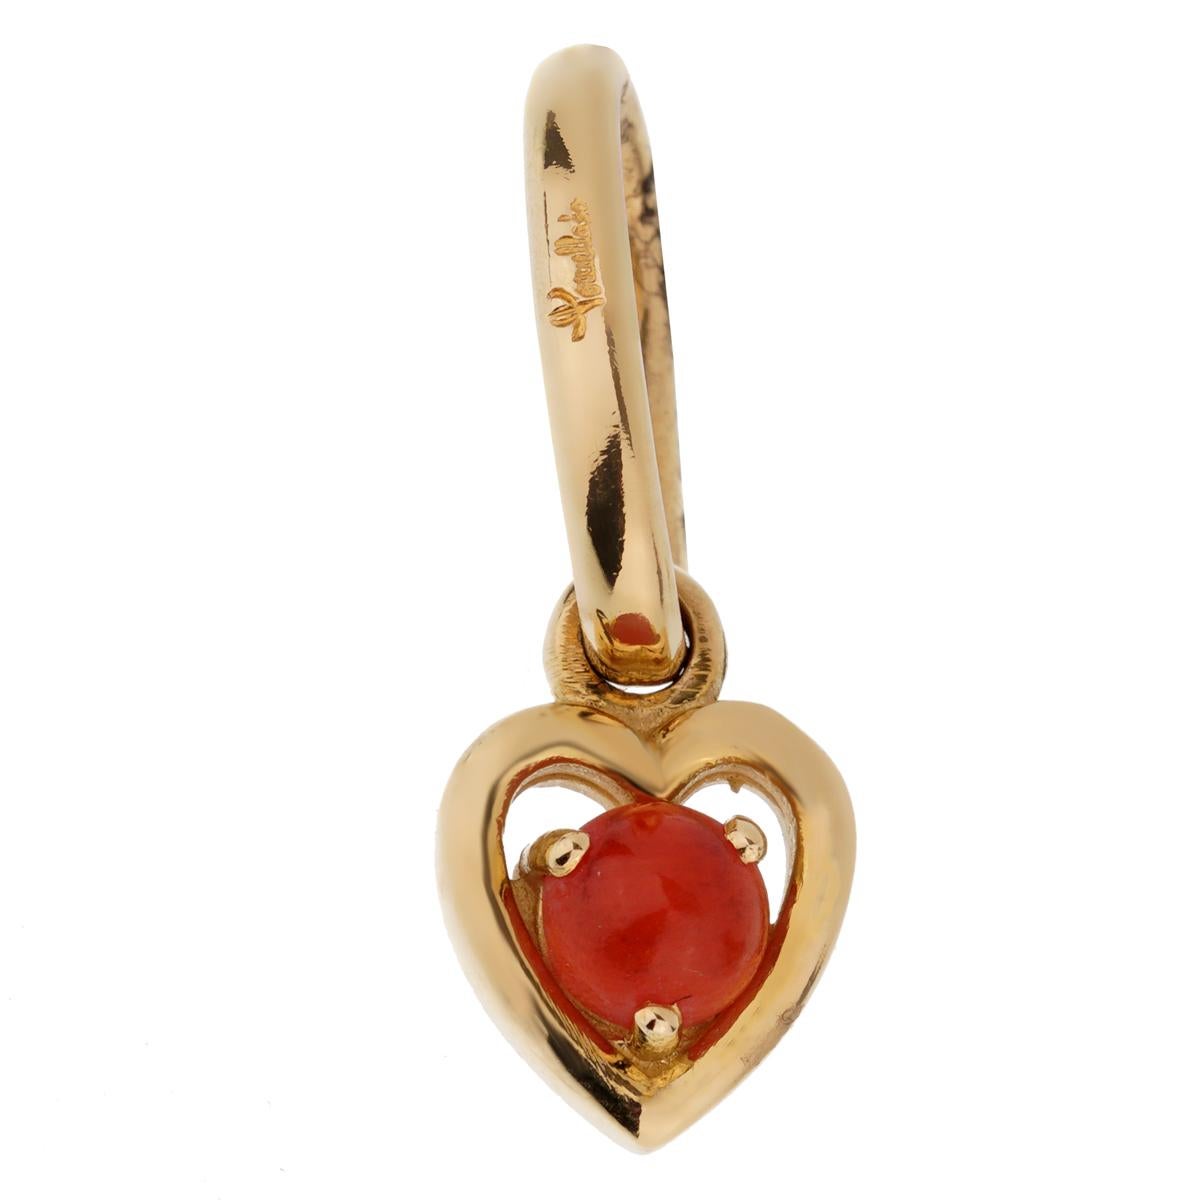 A chic brand new Pomellato charm pendant featuring a .28ct Red Coral set in 18k yellow gold. 

Sku: 2227